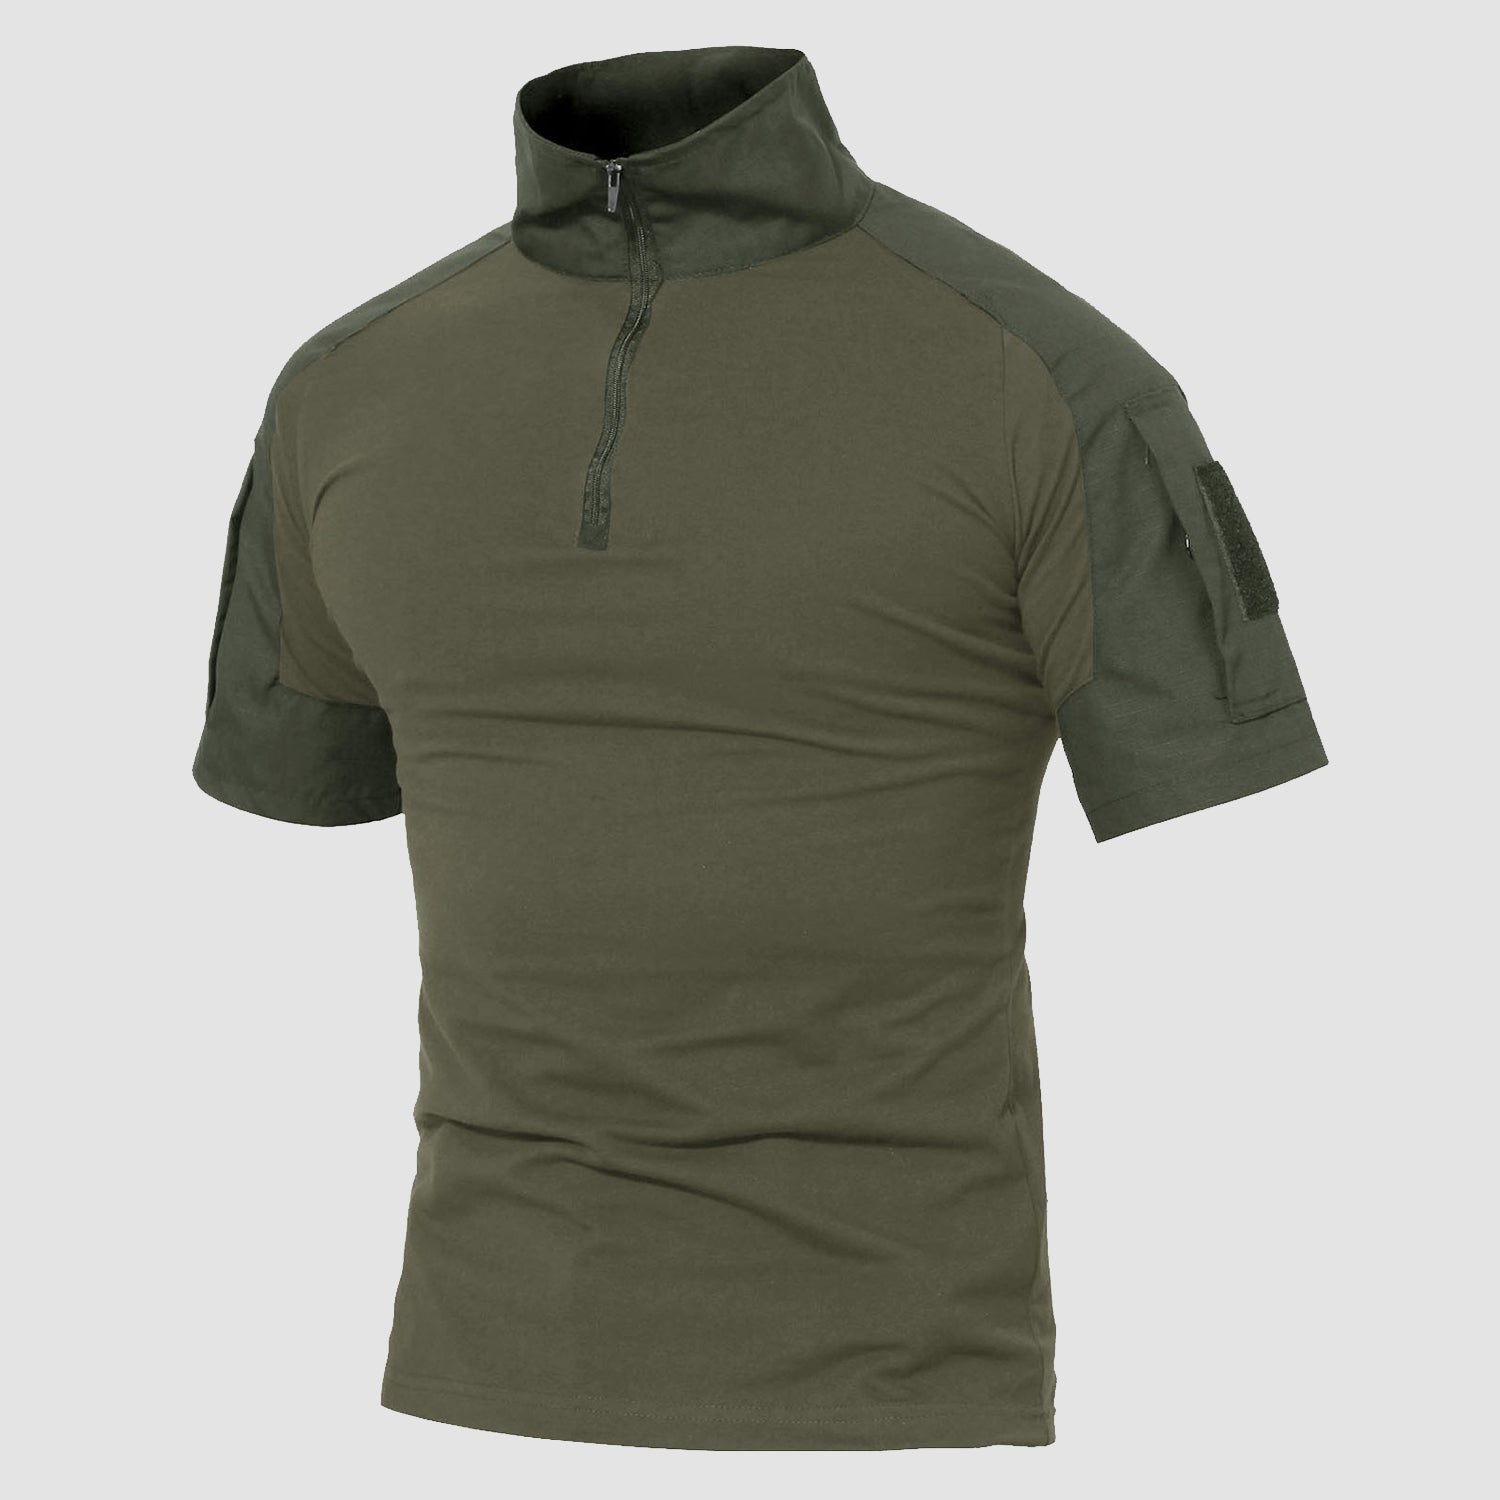 Men's Tactical, Tactical Clothing And Gear